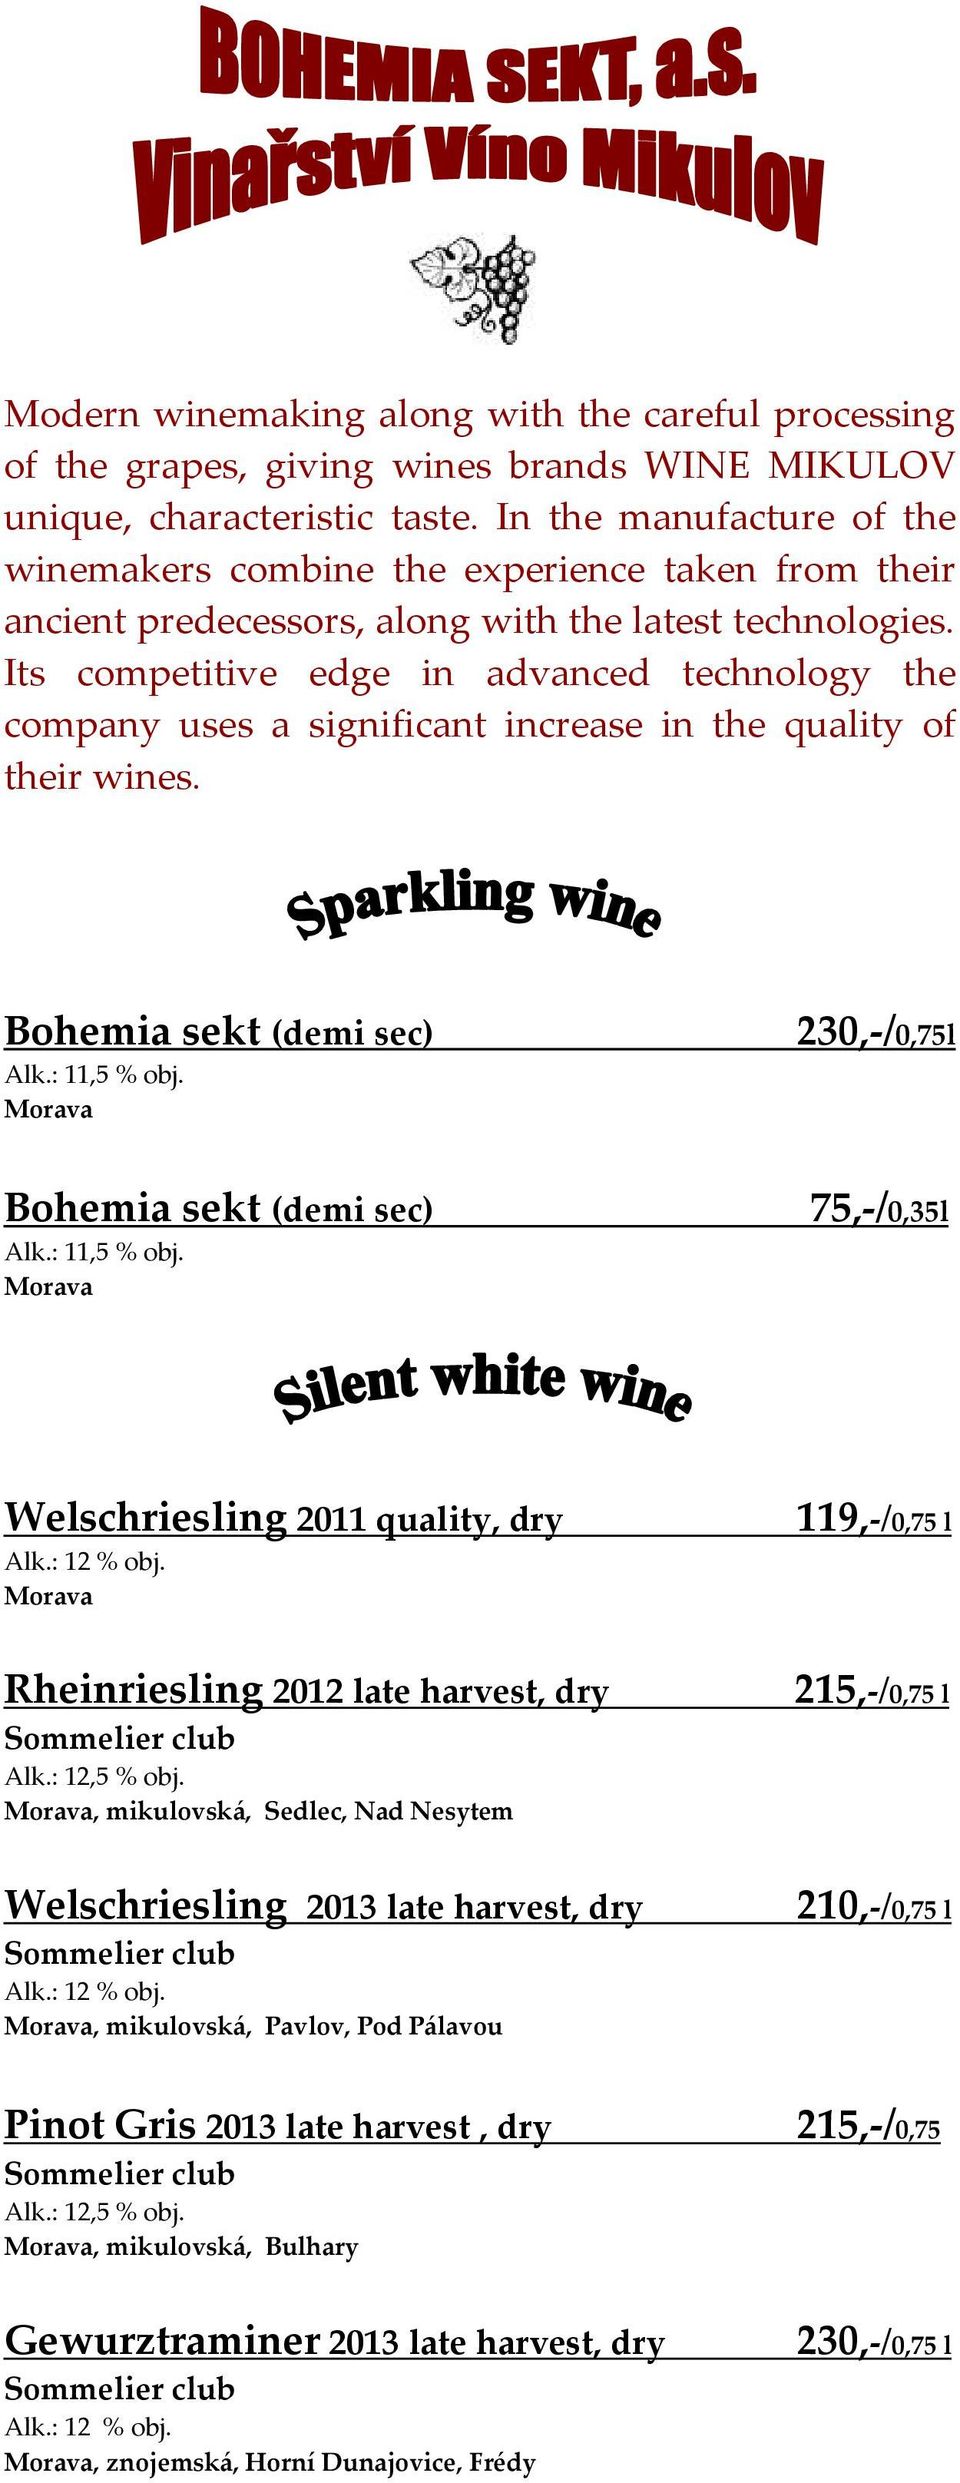 Its competitive edge in advanced technology the company uses a significant increase in the quality of their wines. Bohemia sekt (demi sec) Alk.: 11,5 % obj.